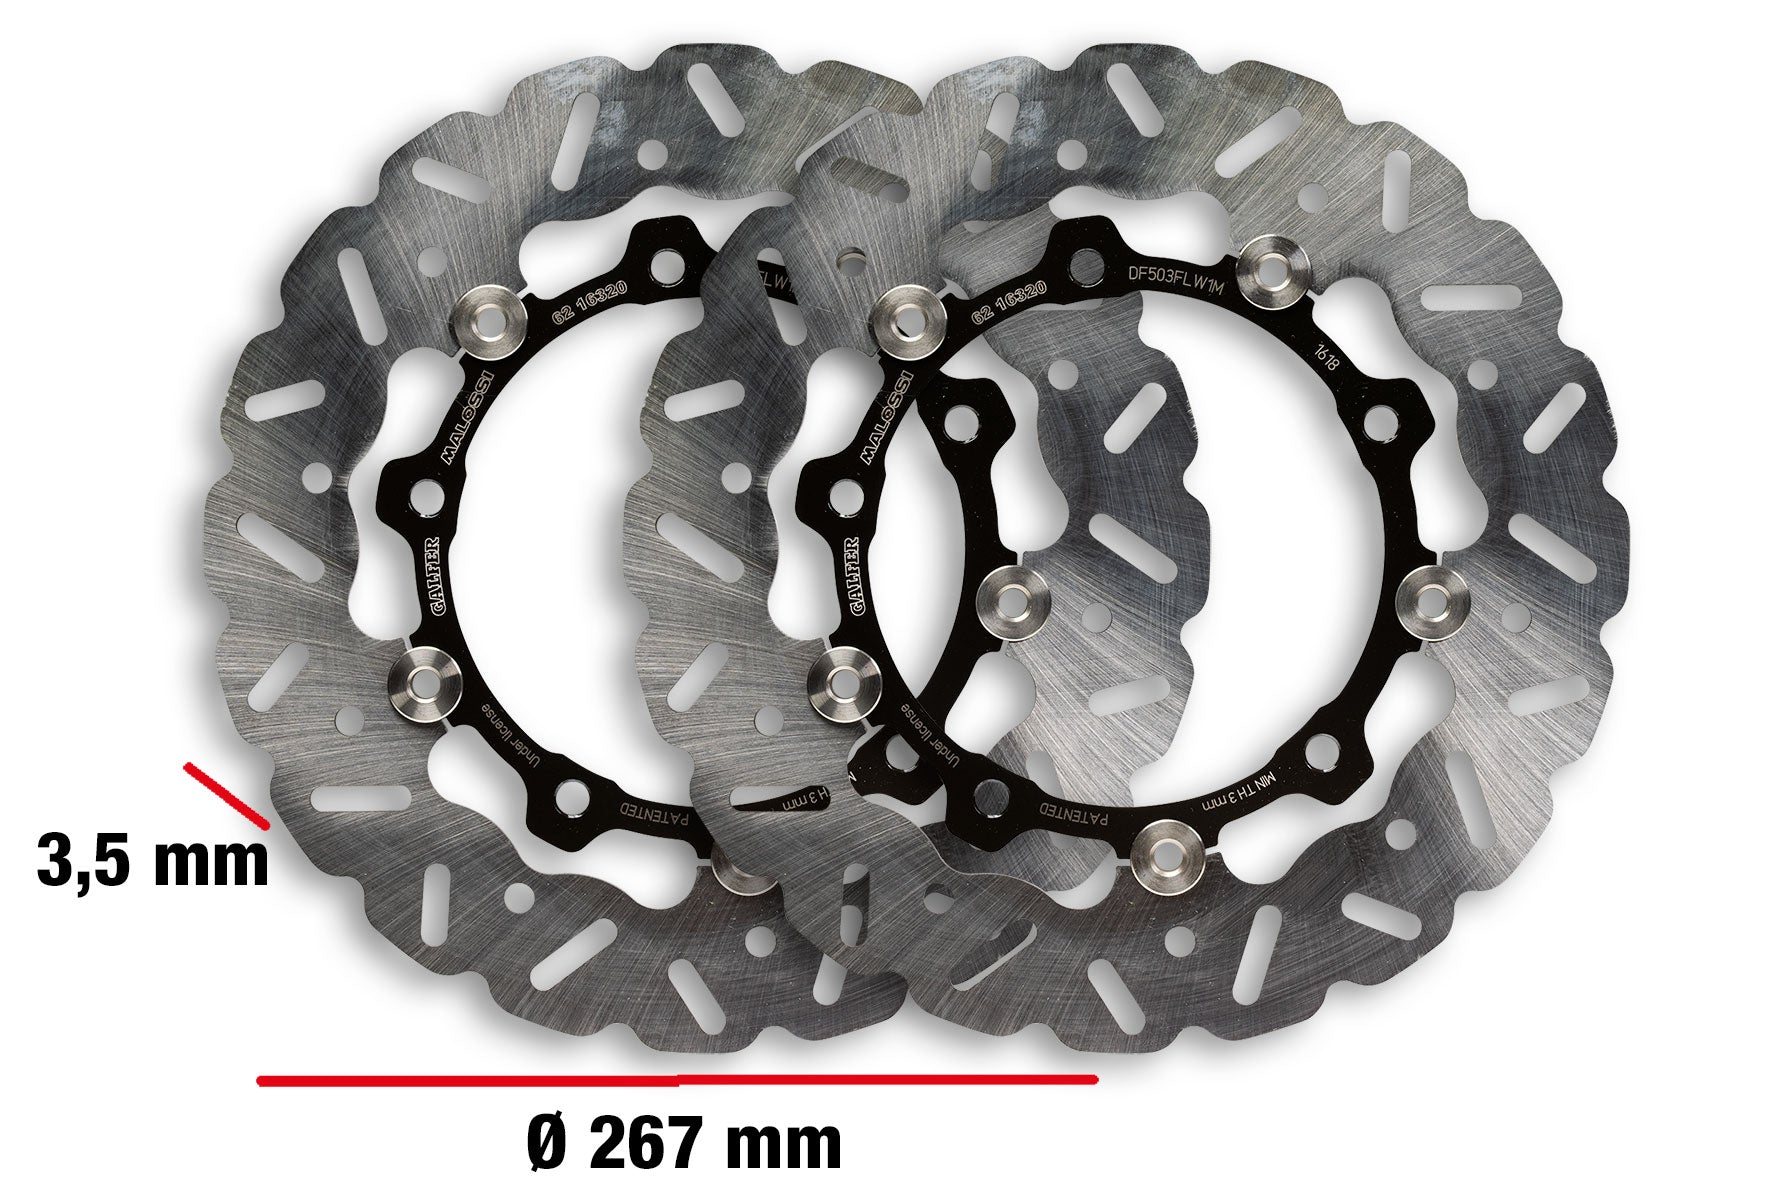 Malossi Front rotor kit for TMAX